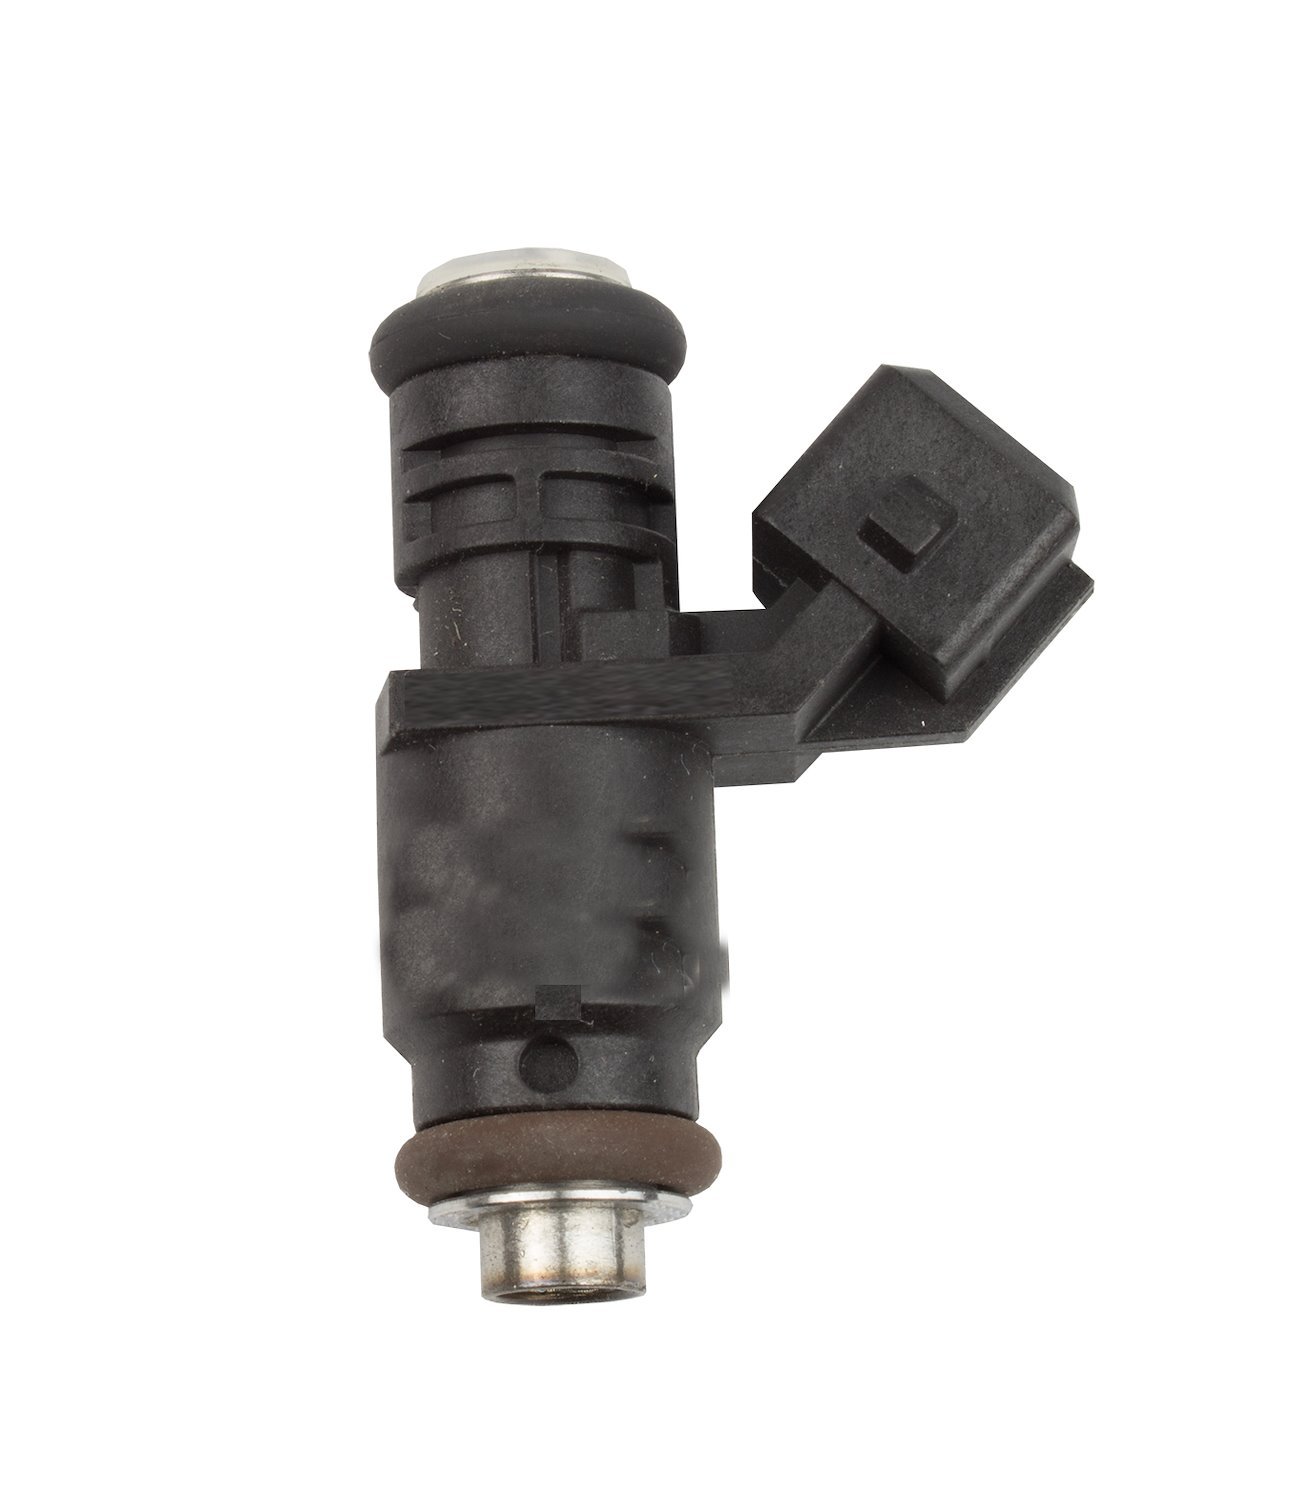 High-Flow Fuel Injector [Fits 550 HP Bandit Series EFI System]